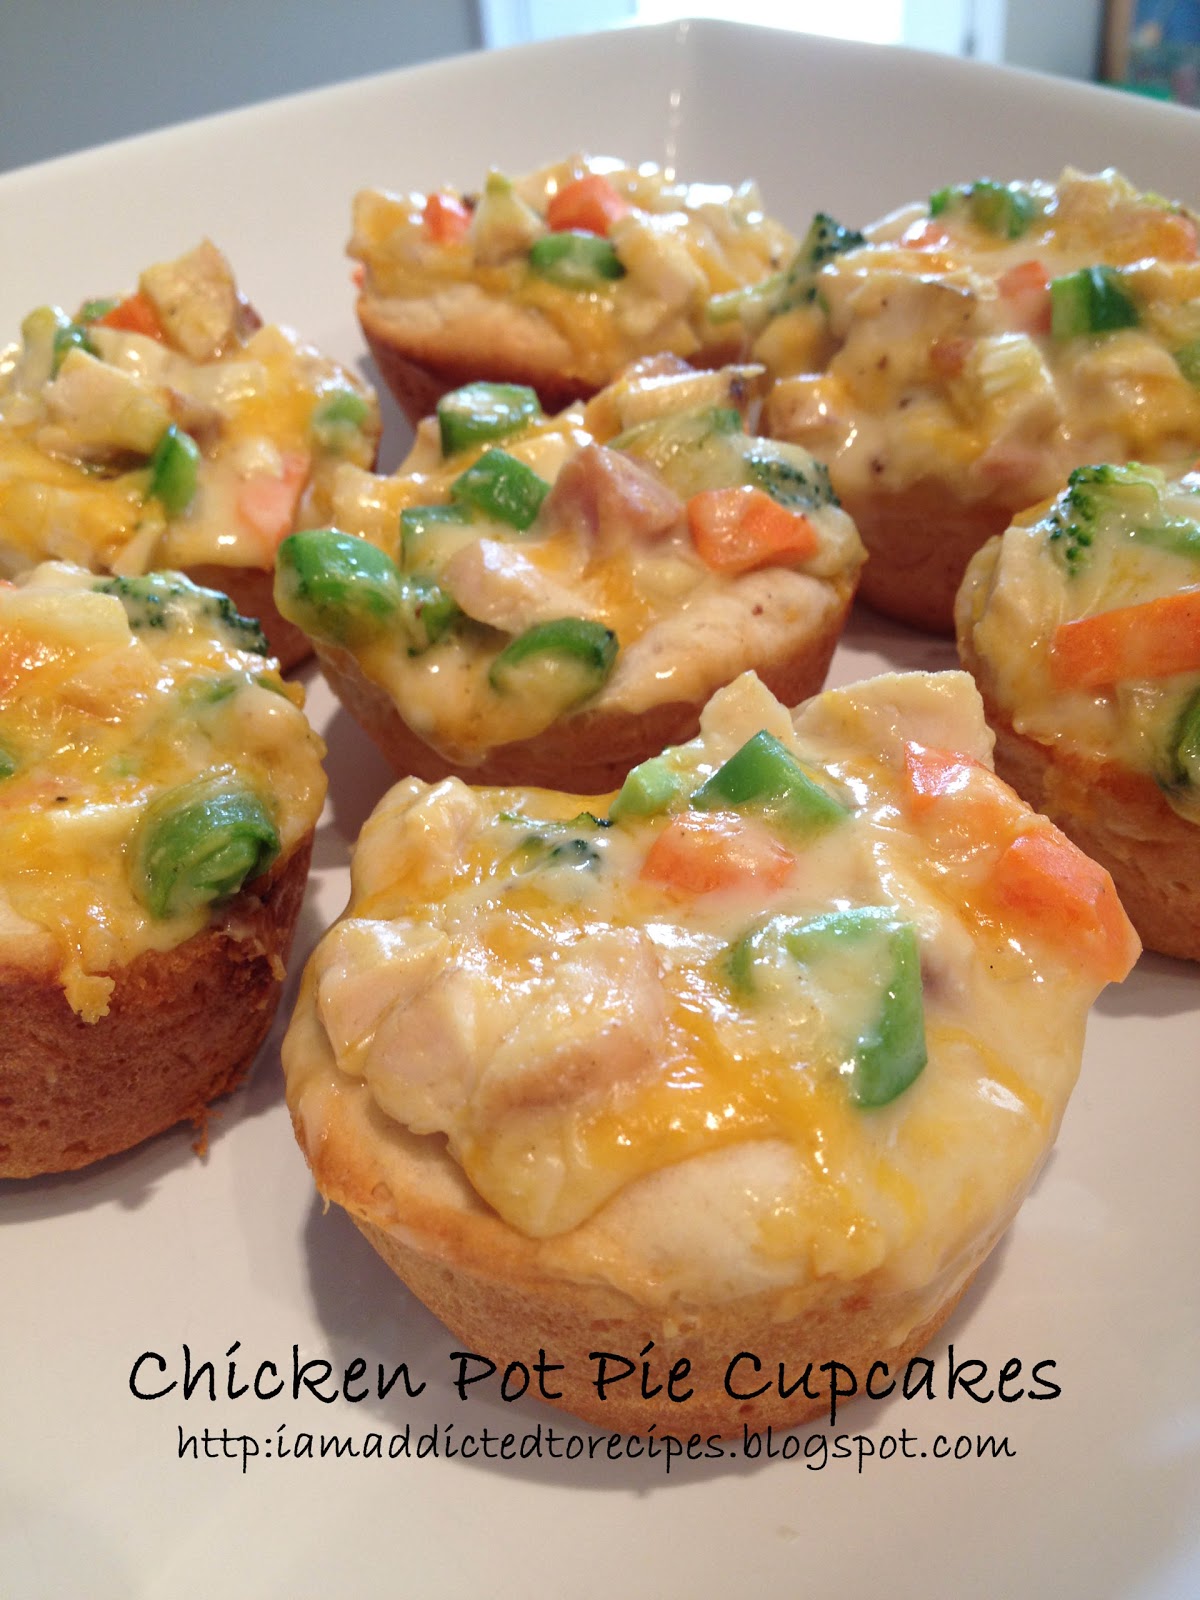 Addicted to Recipes: Chicken Pot Pie Cupcakes